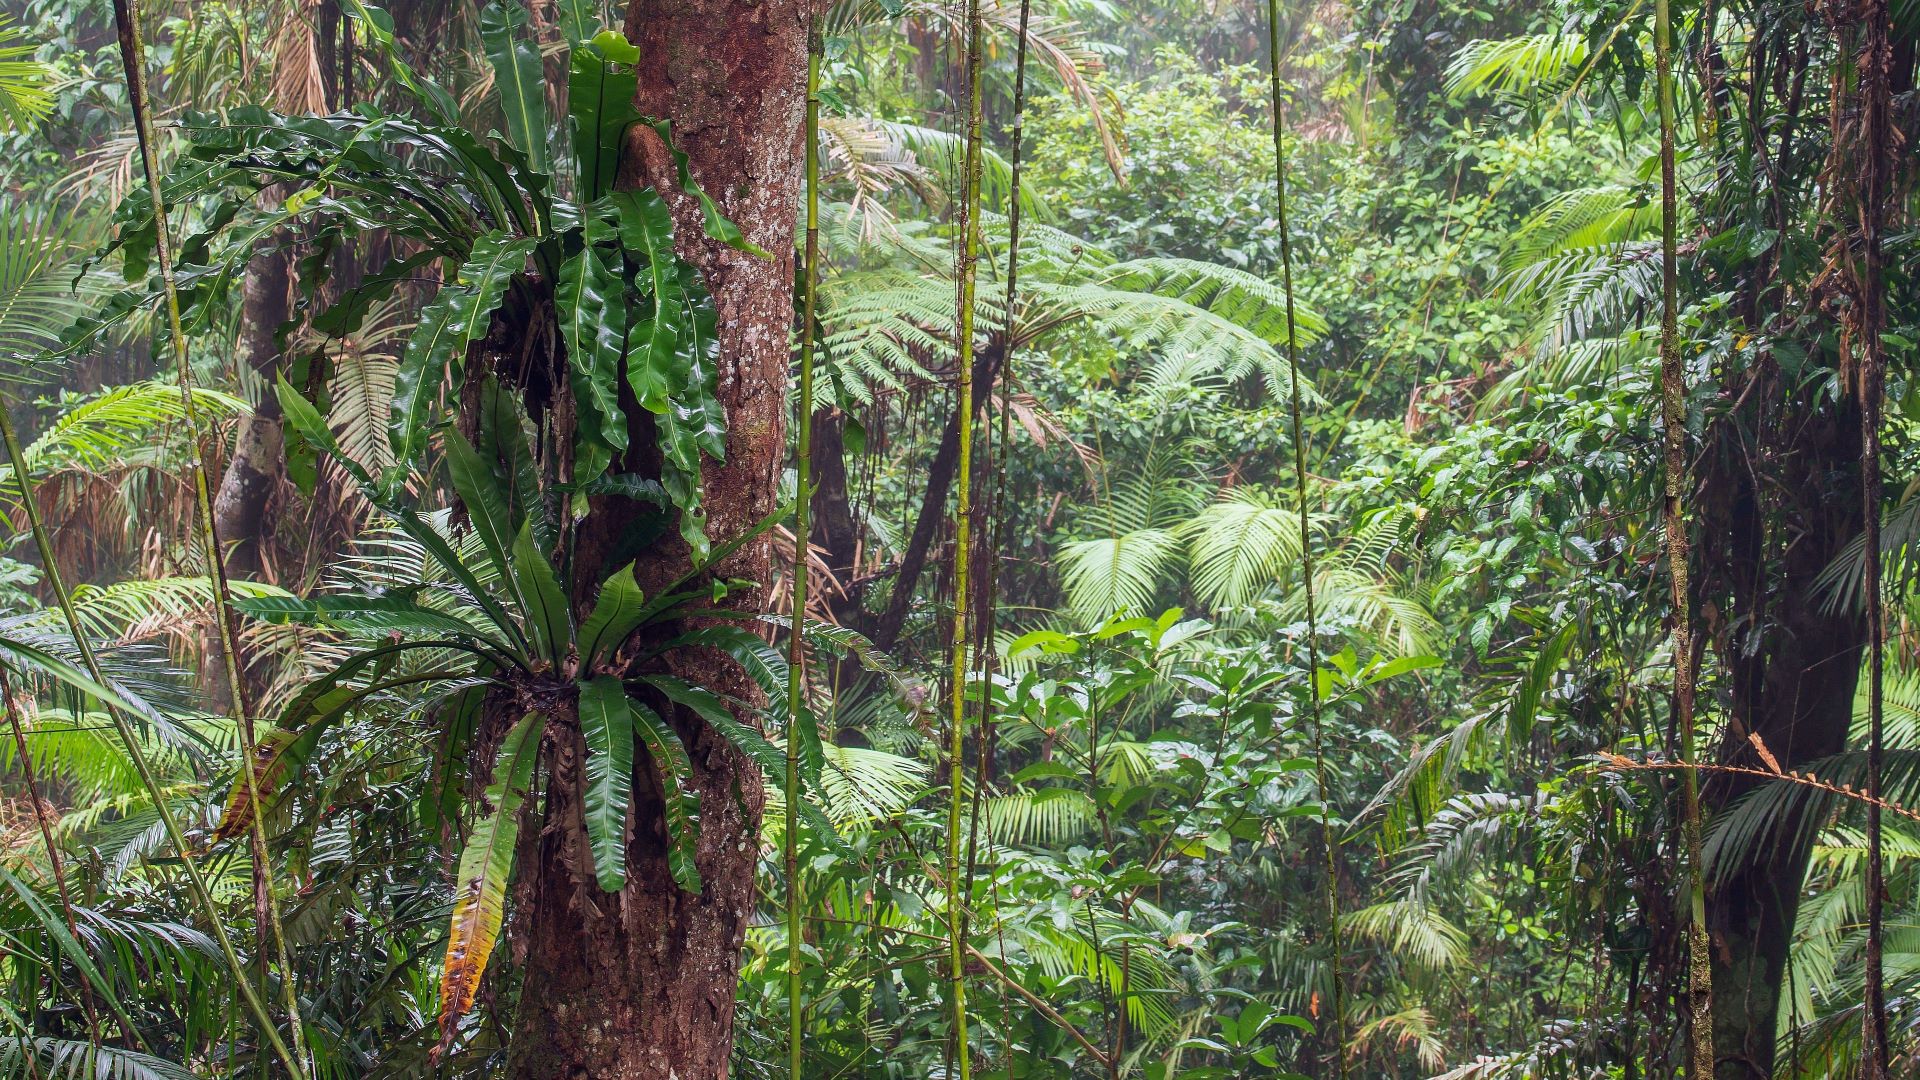 A picture of epiphytes in a forest.